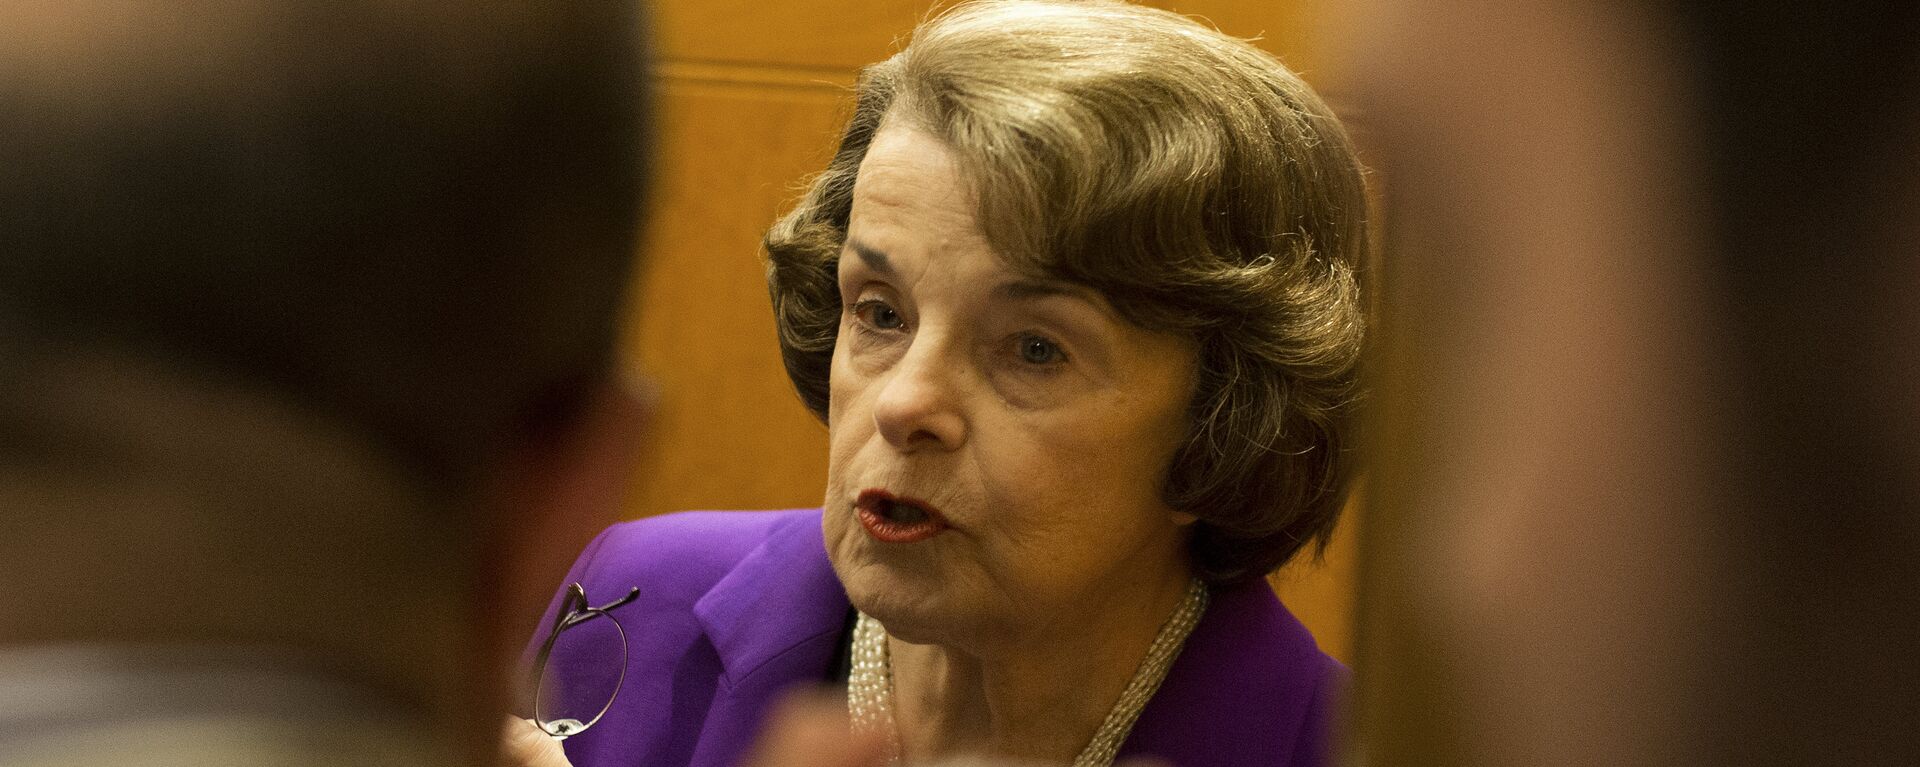 Senator Dianne Feinstein, D-CA, speaks to the press in the Senate at the US Capitol in Washington, DC on May 31, 2015 - Sputnik International, 1920, 15.04.2022